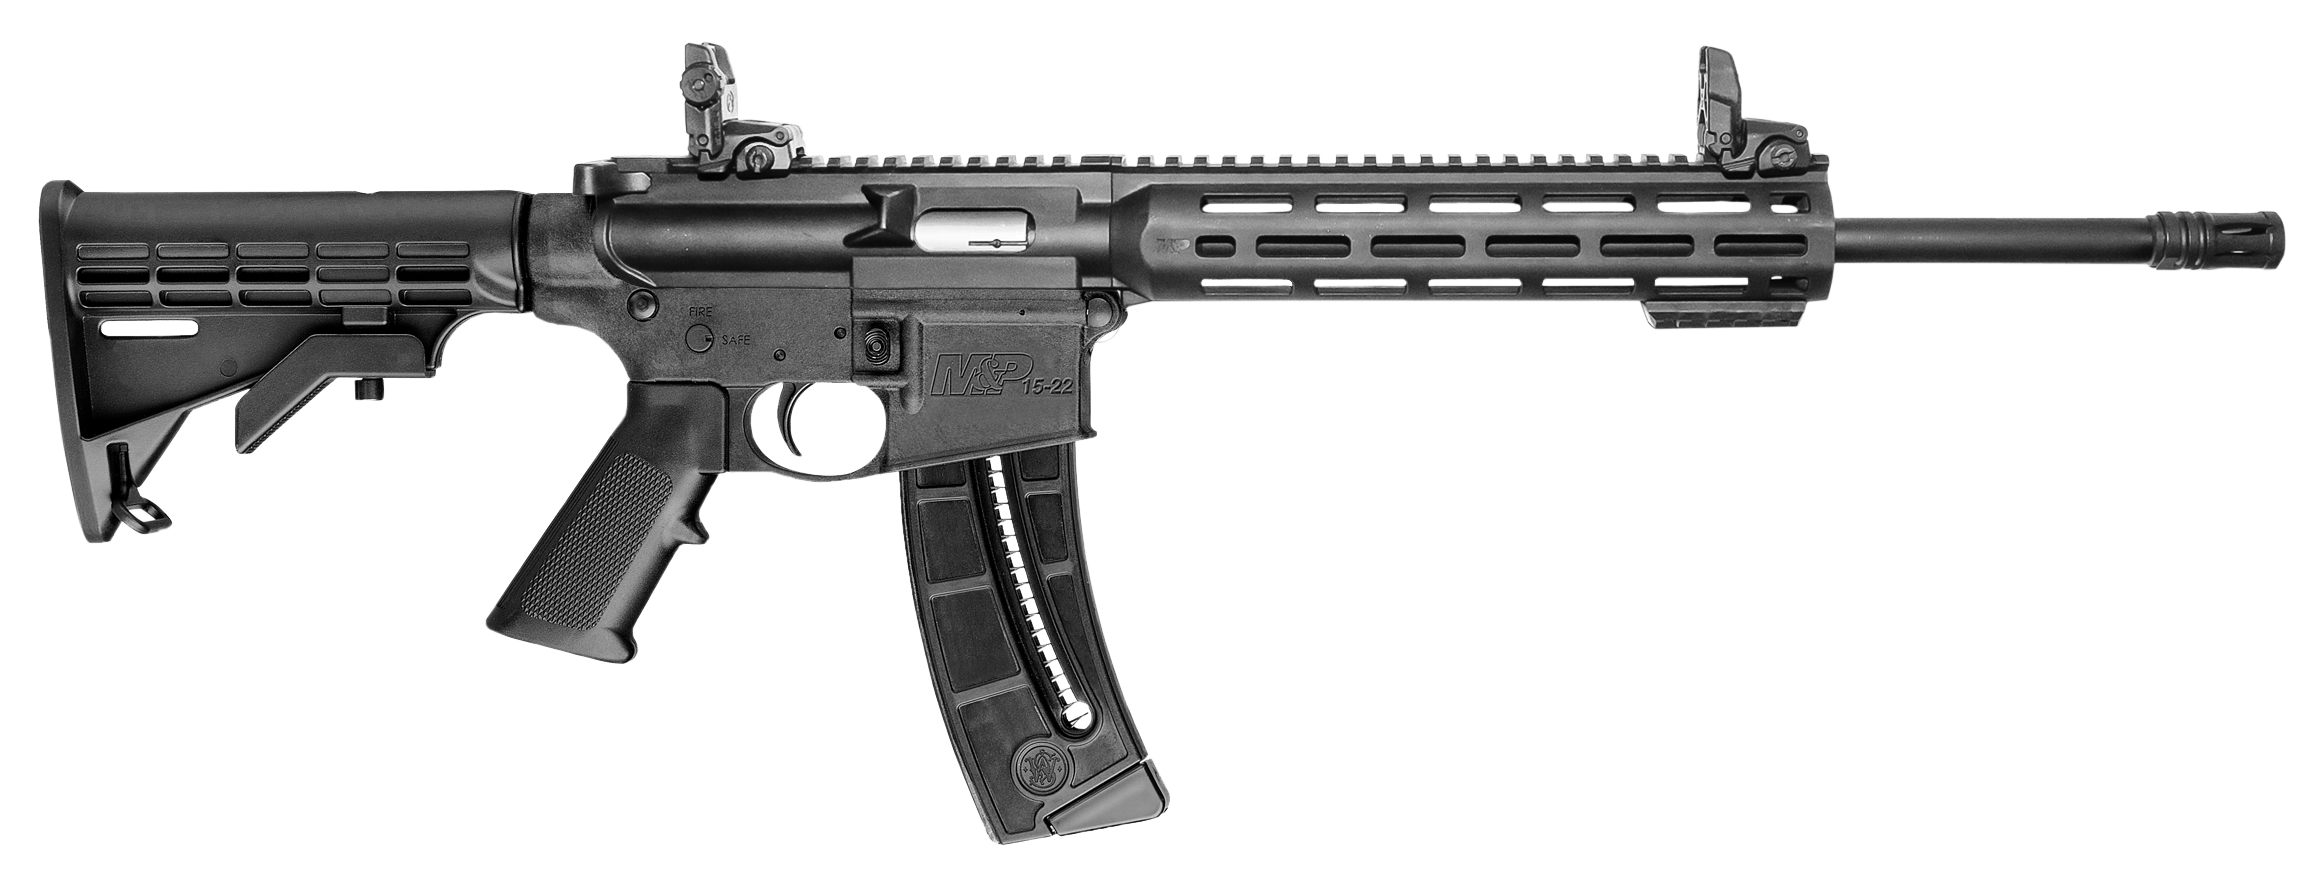 Smith & Wesson S&W M&P15-22 Sport 22 LR Caliber with 25+1 Capacity 10208-img-6